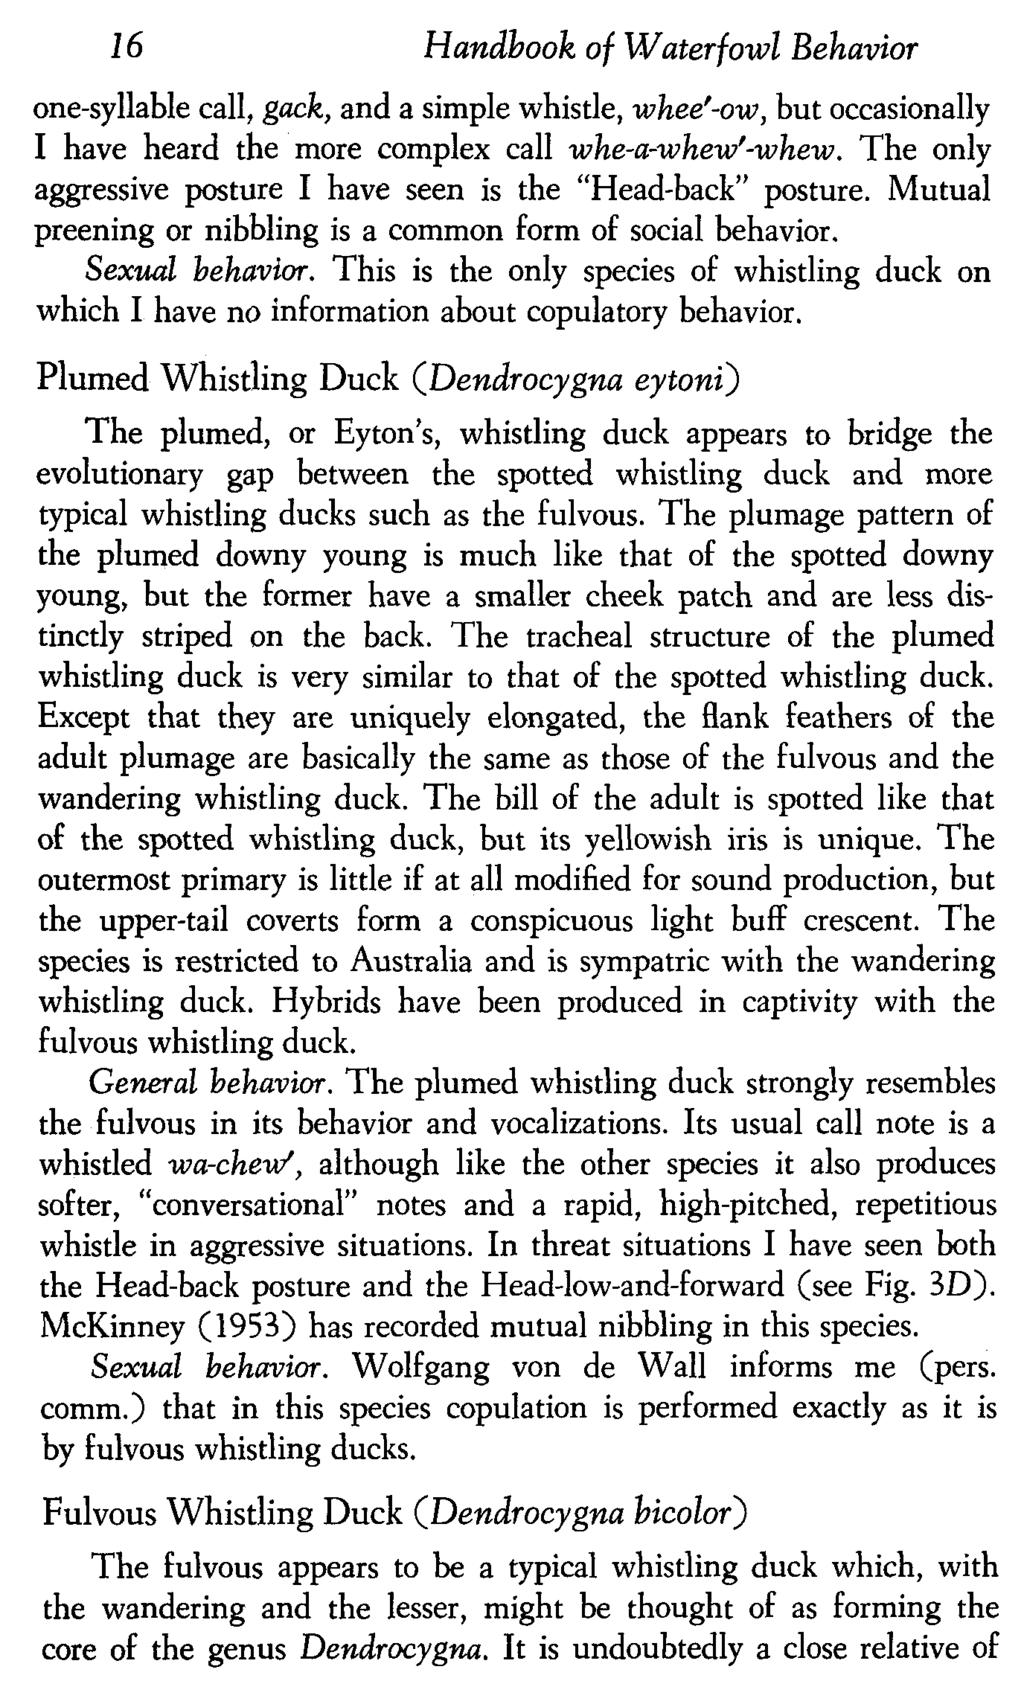 16 Handbook of Waterfowl Behavior one-syllable call, gack, and a simple whistle, wheef-ow, but occasionally I have heard the more complex call whe-a-whew'-whew.